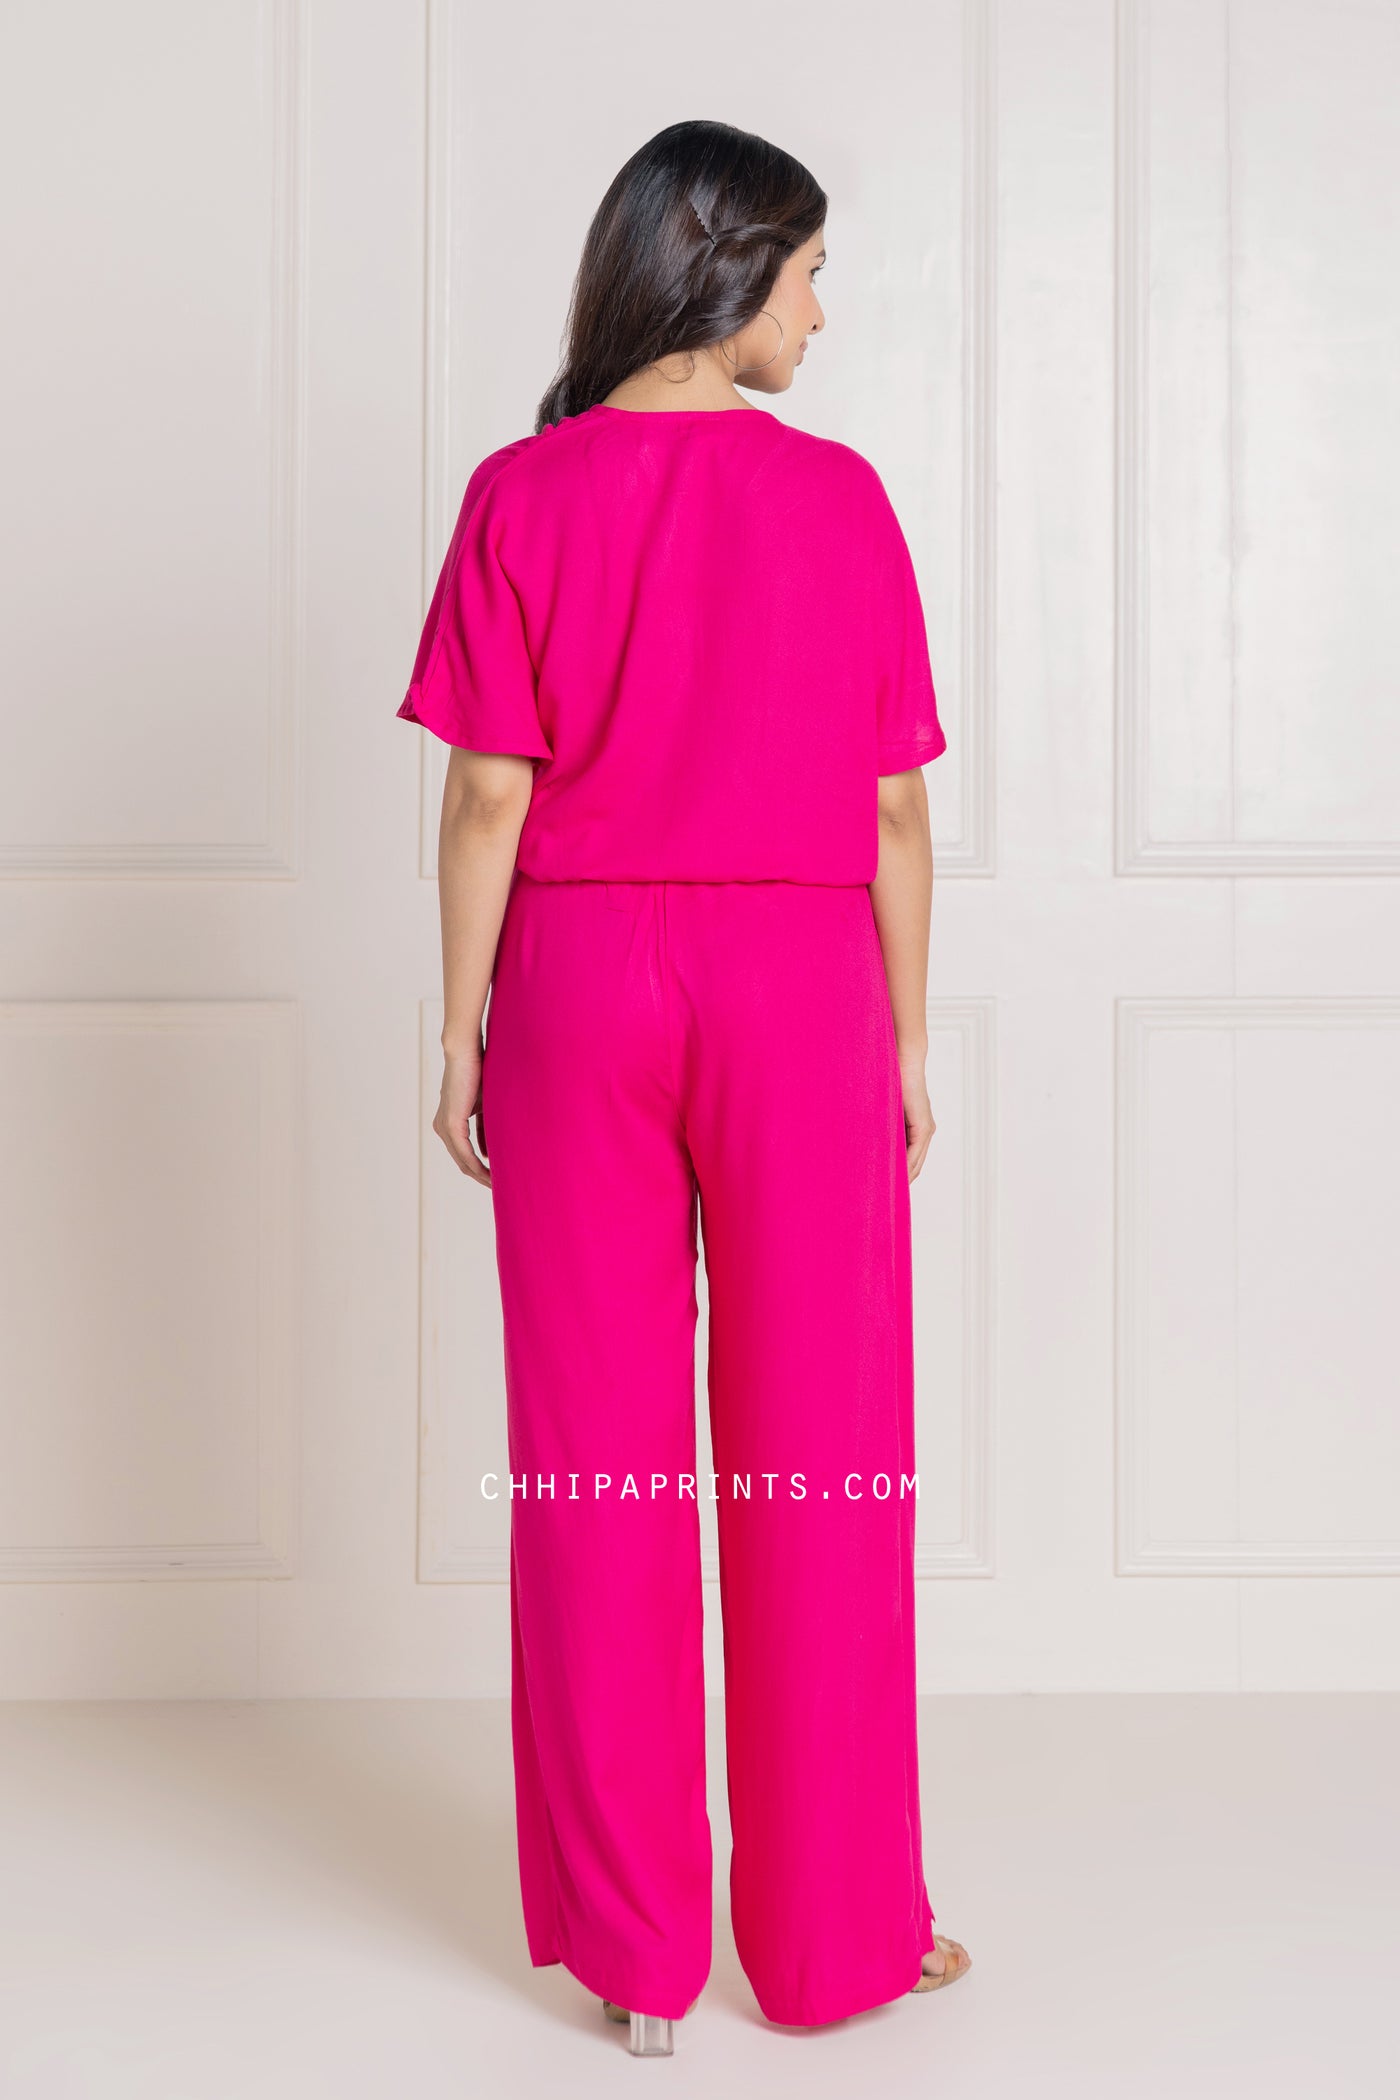 Cotton Modal Wrap Top and Pants Co Ord Set in Solid Shades of Hot Pink